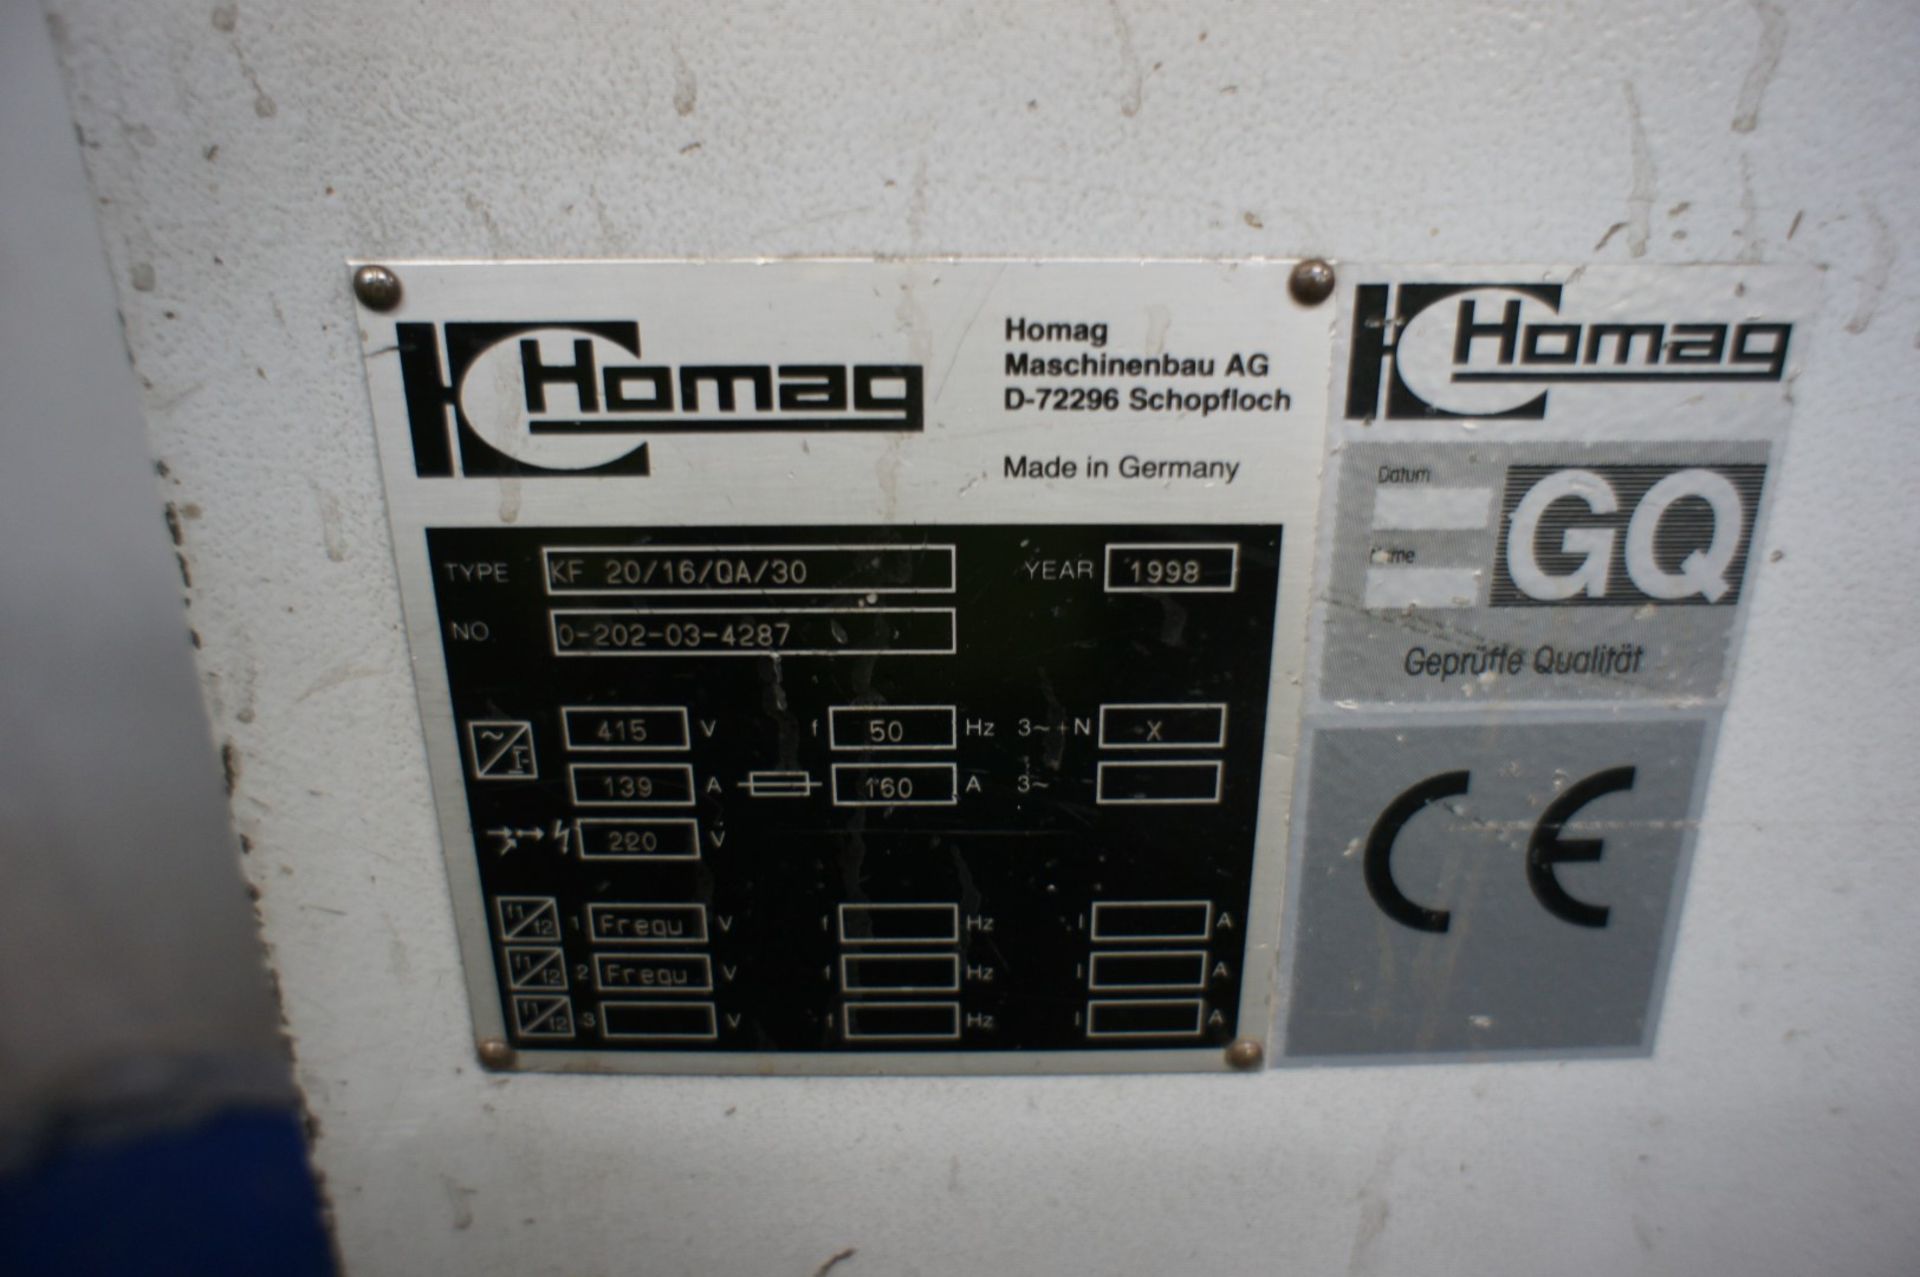 * Homag KF 20/16/QA/30 serial No 0-202-03-4287 Double Sided Edgebander YOM 1998. Please note there - Image 21 of 22